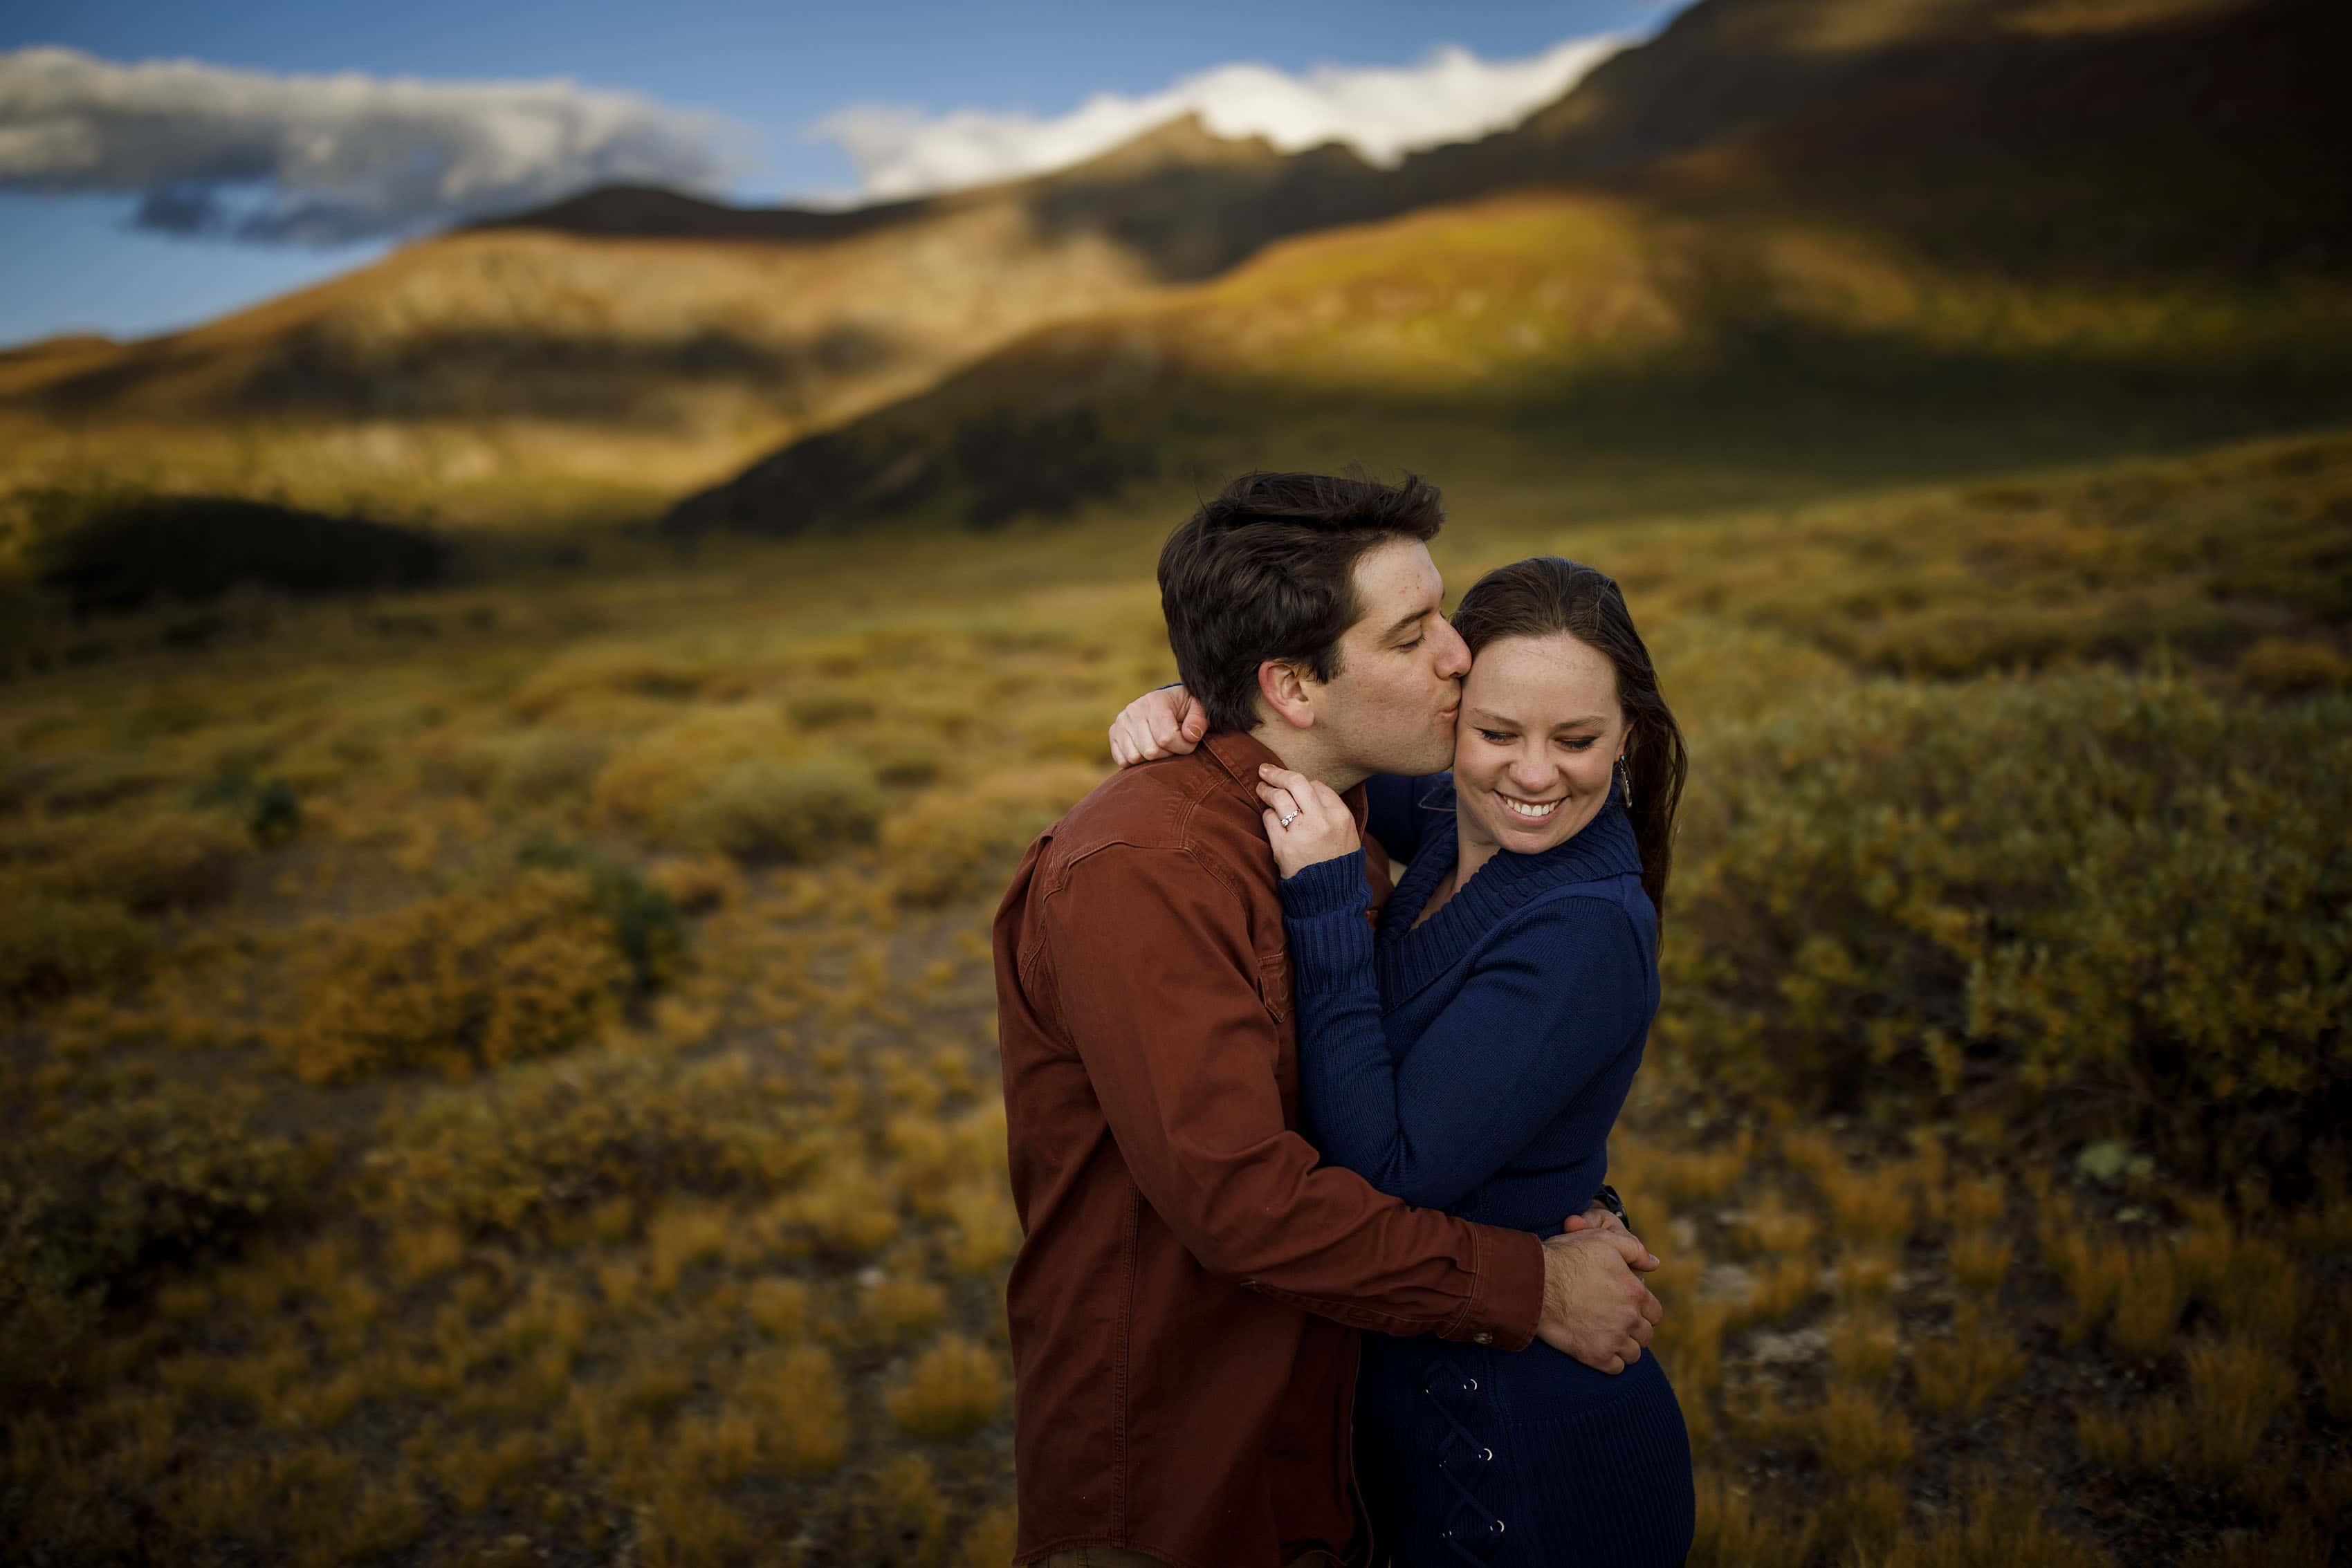 Chris and Madeline share a cute moments together as the sun sets during their Guanella Pass engagement session